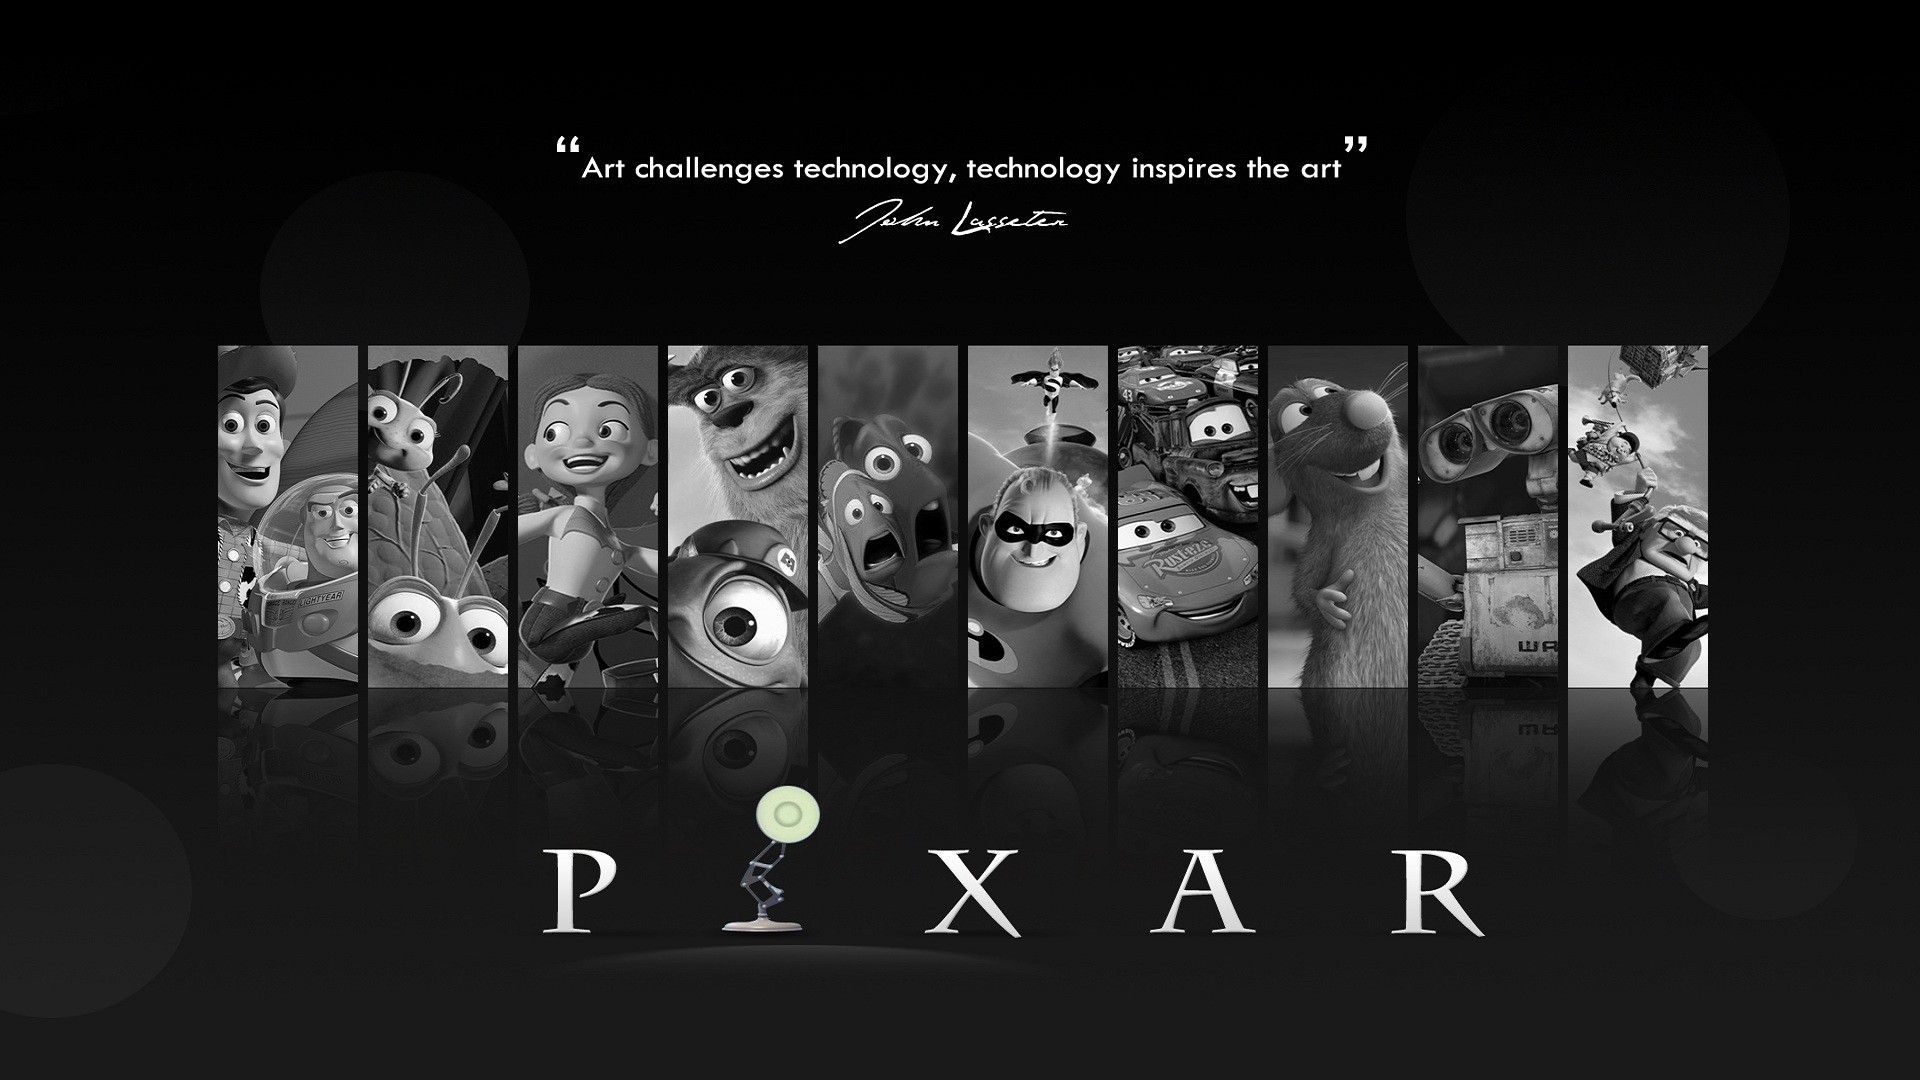 General 1920x1080 movies Pixar Animation Studios Toy Story Finding Nemo Monsters, Inc. Cars (movie) WALL-E collage